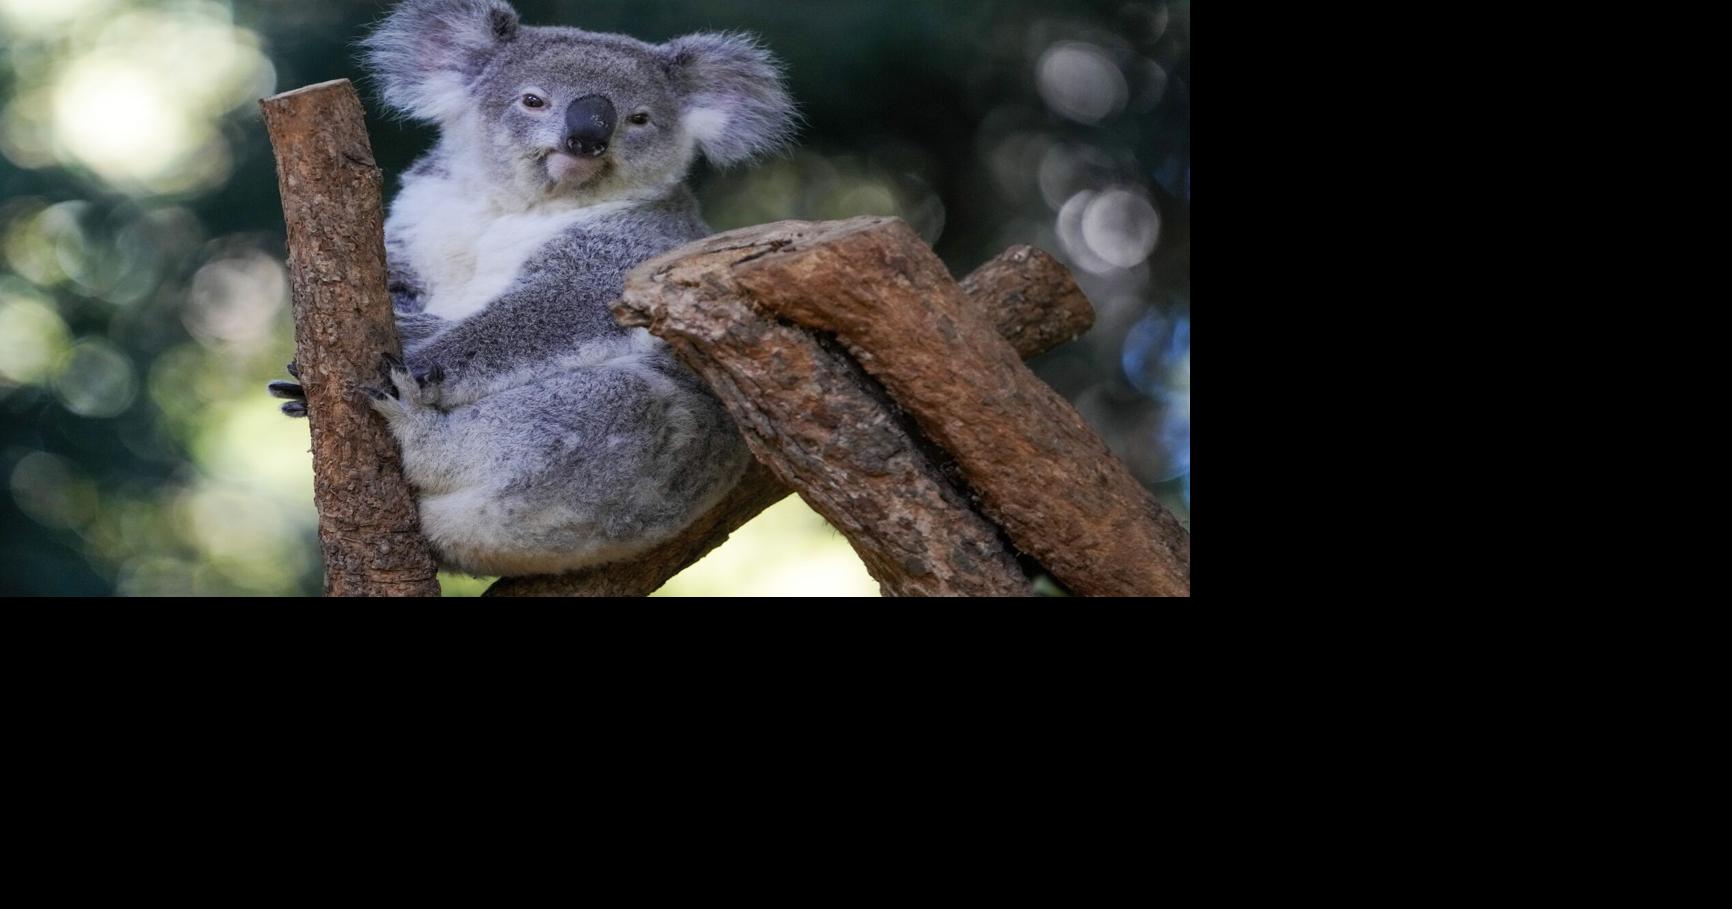 First wild koalas caught and vaccinated against chlamydia